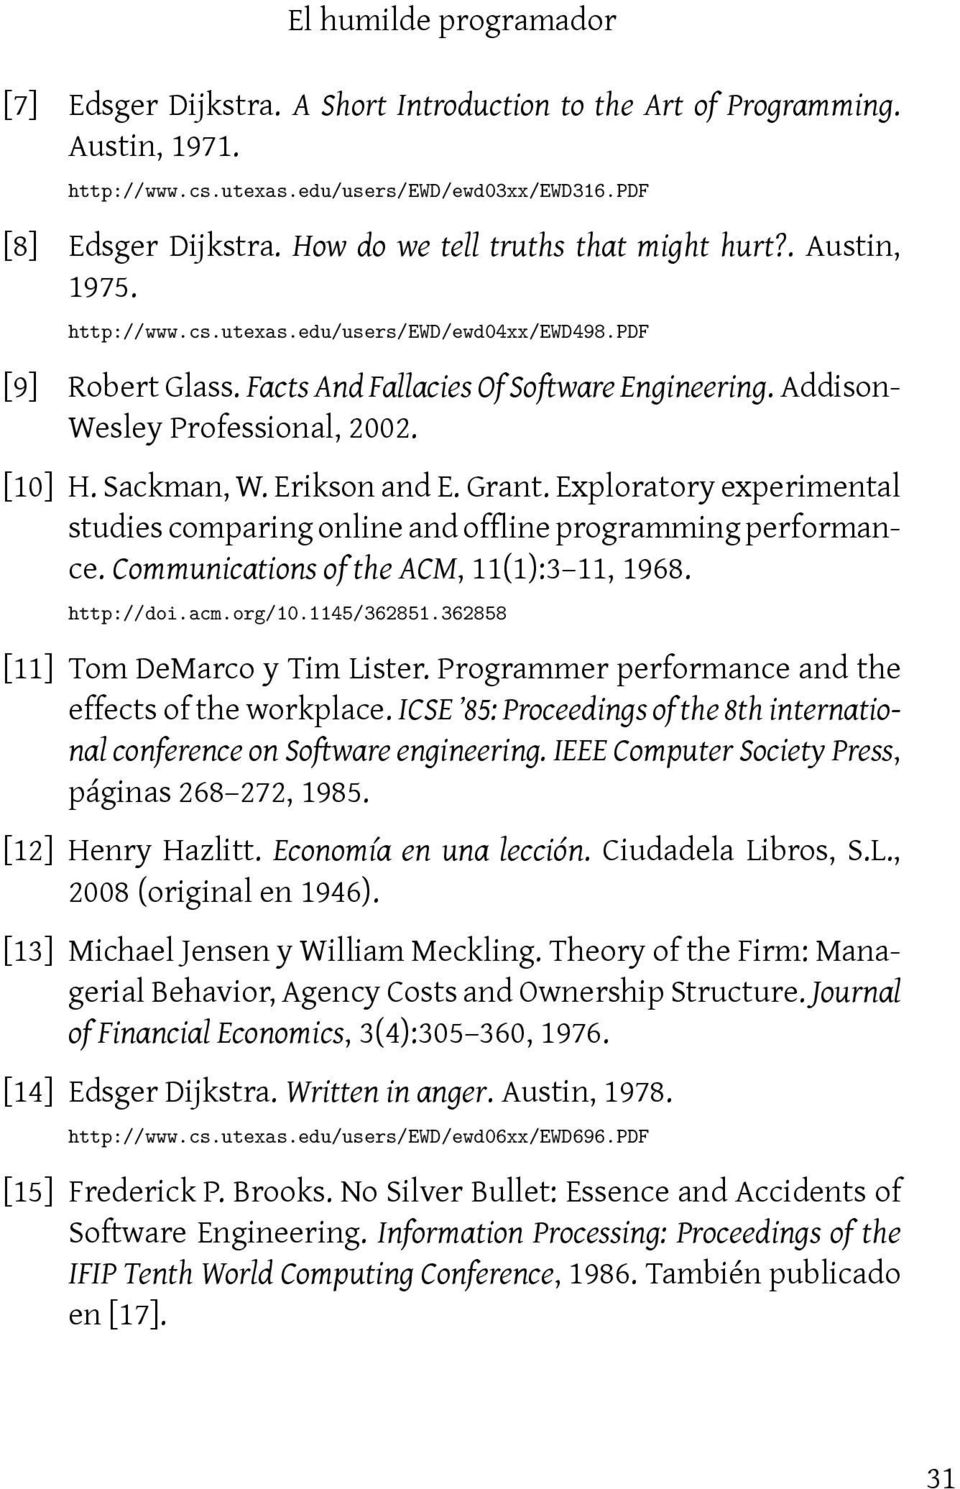 Erikson and E. Grant. Exploratory experimental studies comparing online and offline programming performance. Communications of the ACM, 11(1):3 11, 1968. http://doi.acm.org/10.1145/362851.